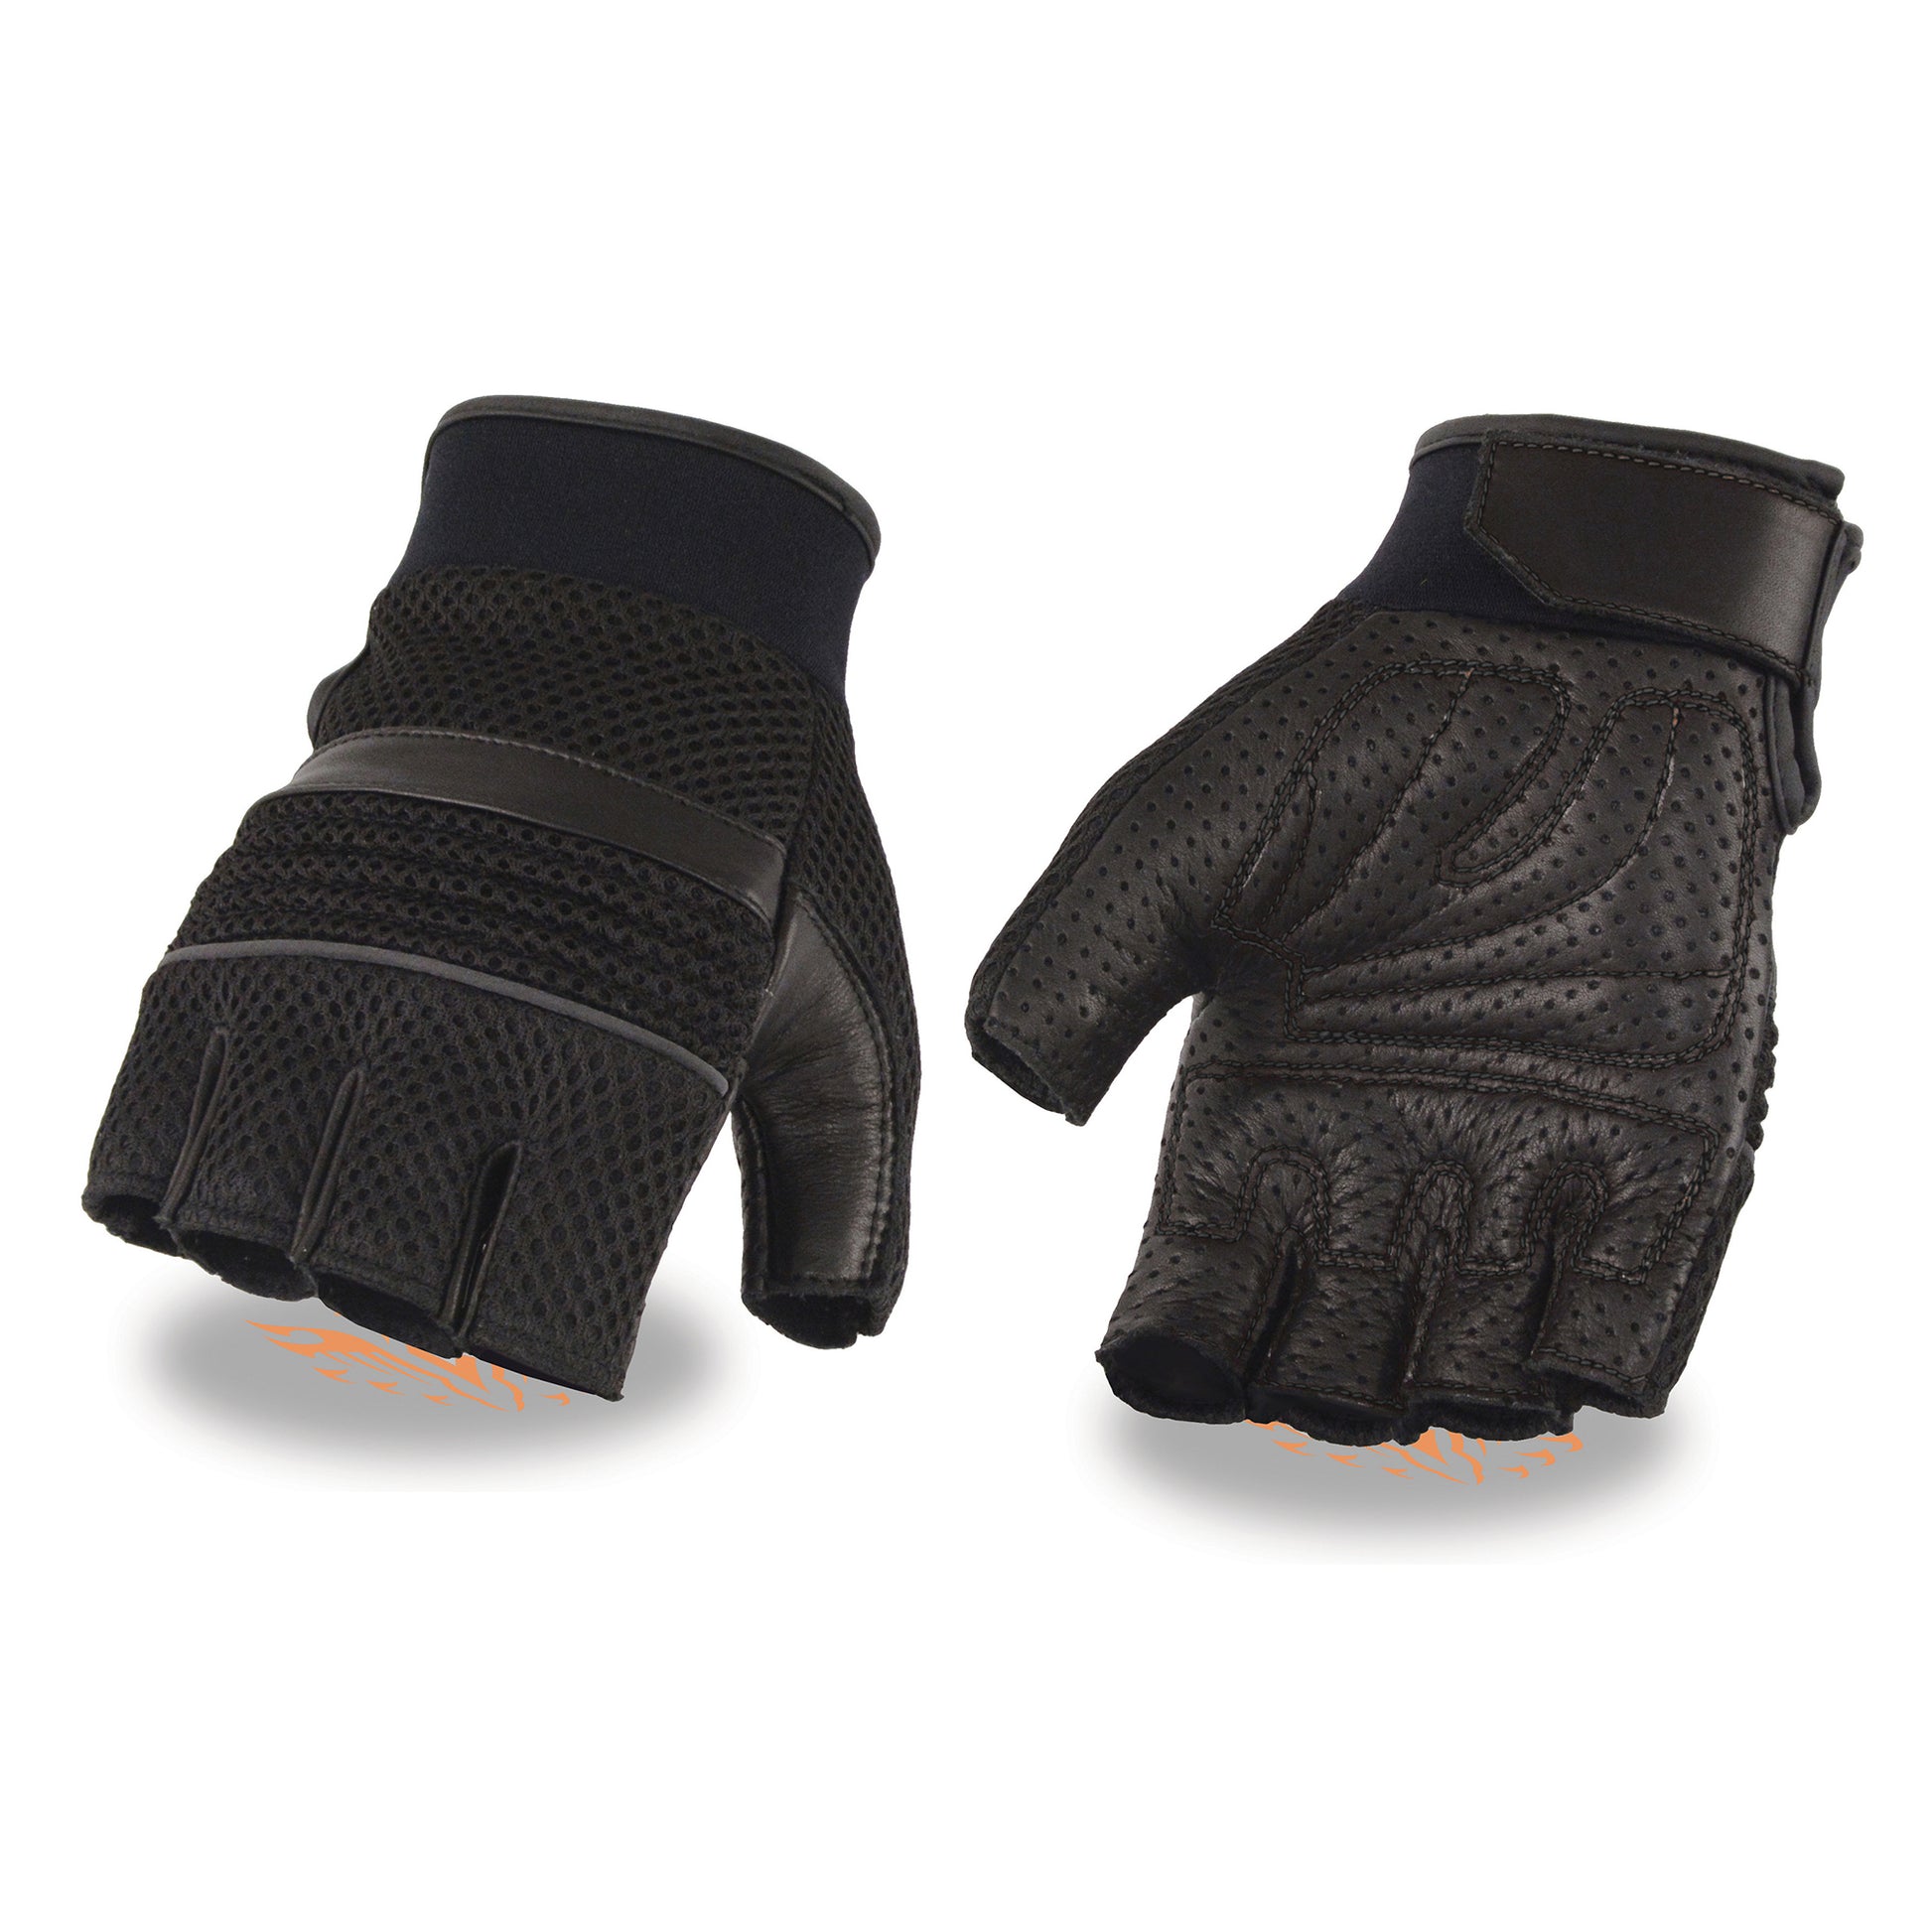 Men's Leather & Mesh Fingerless Gloves with Gel Palm, Reflective Piping